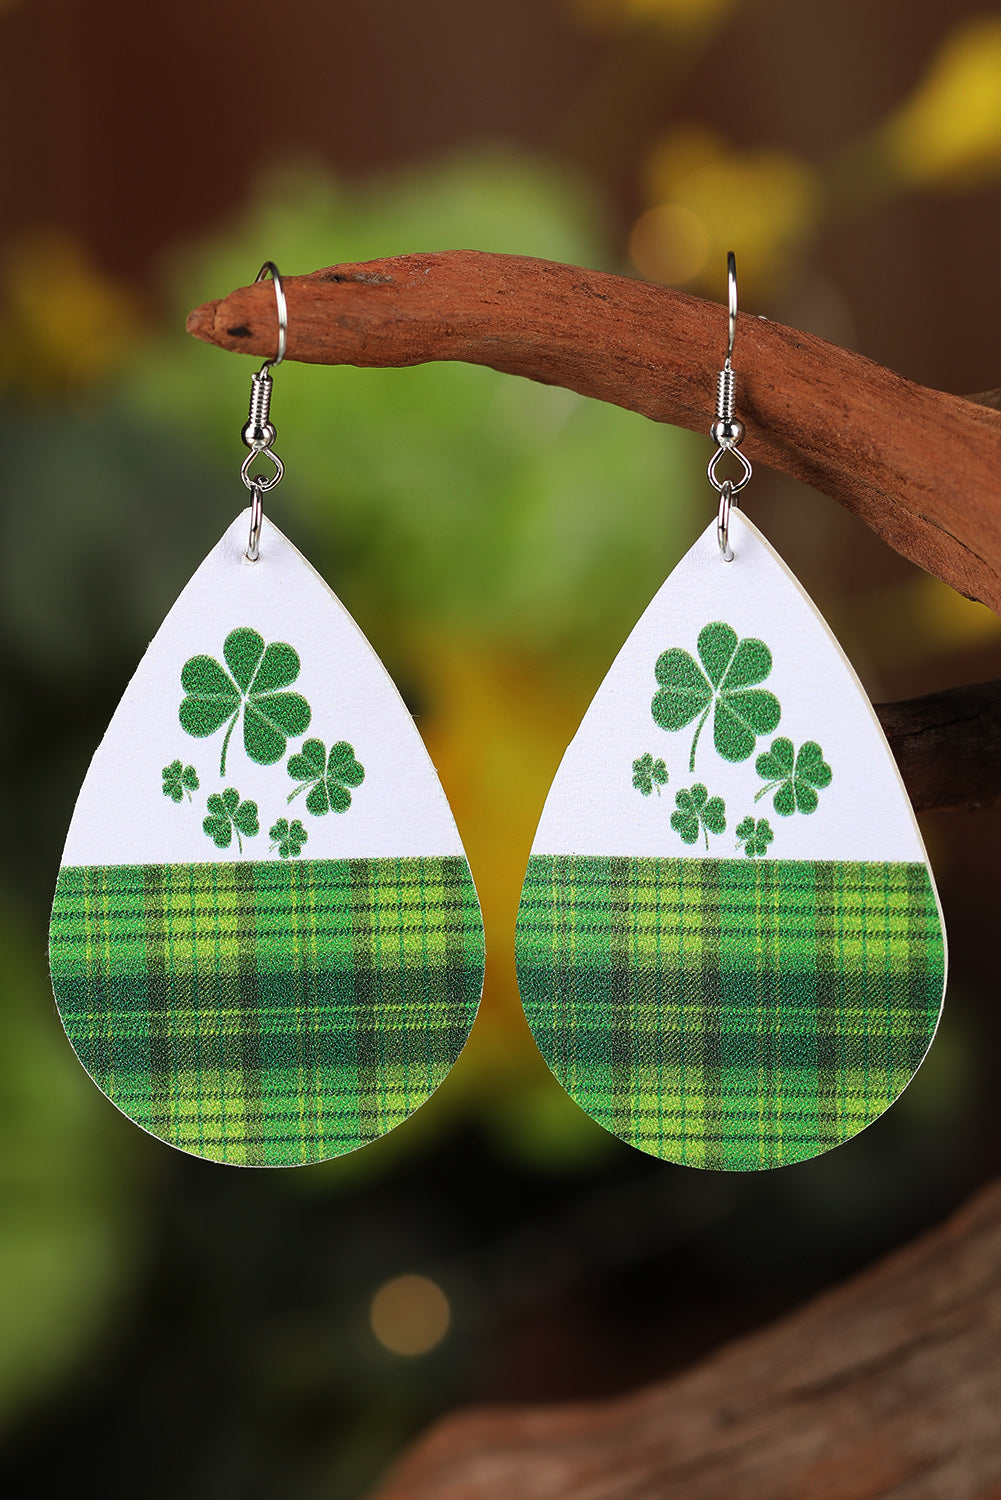 Green Clovers Plaid Patterns Earrings Jewelry JT's Designer Fashion